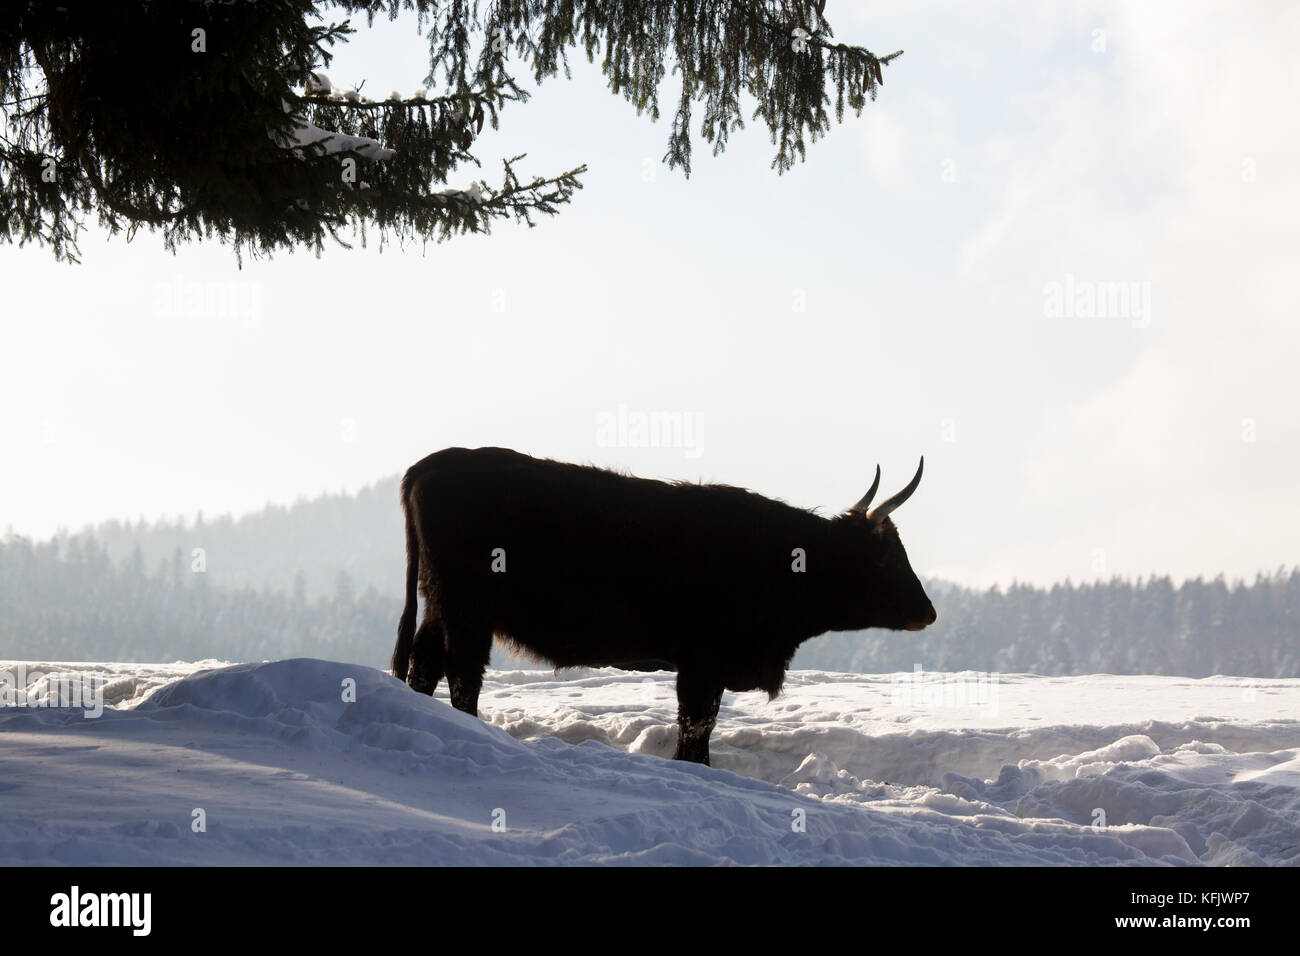 Heck cattle (Bos domesticus) bull in the snow in winter. Stock Photo